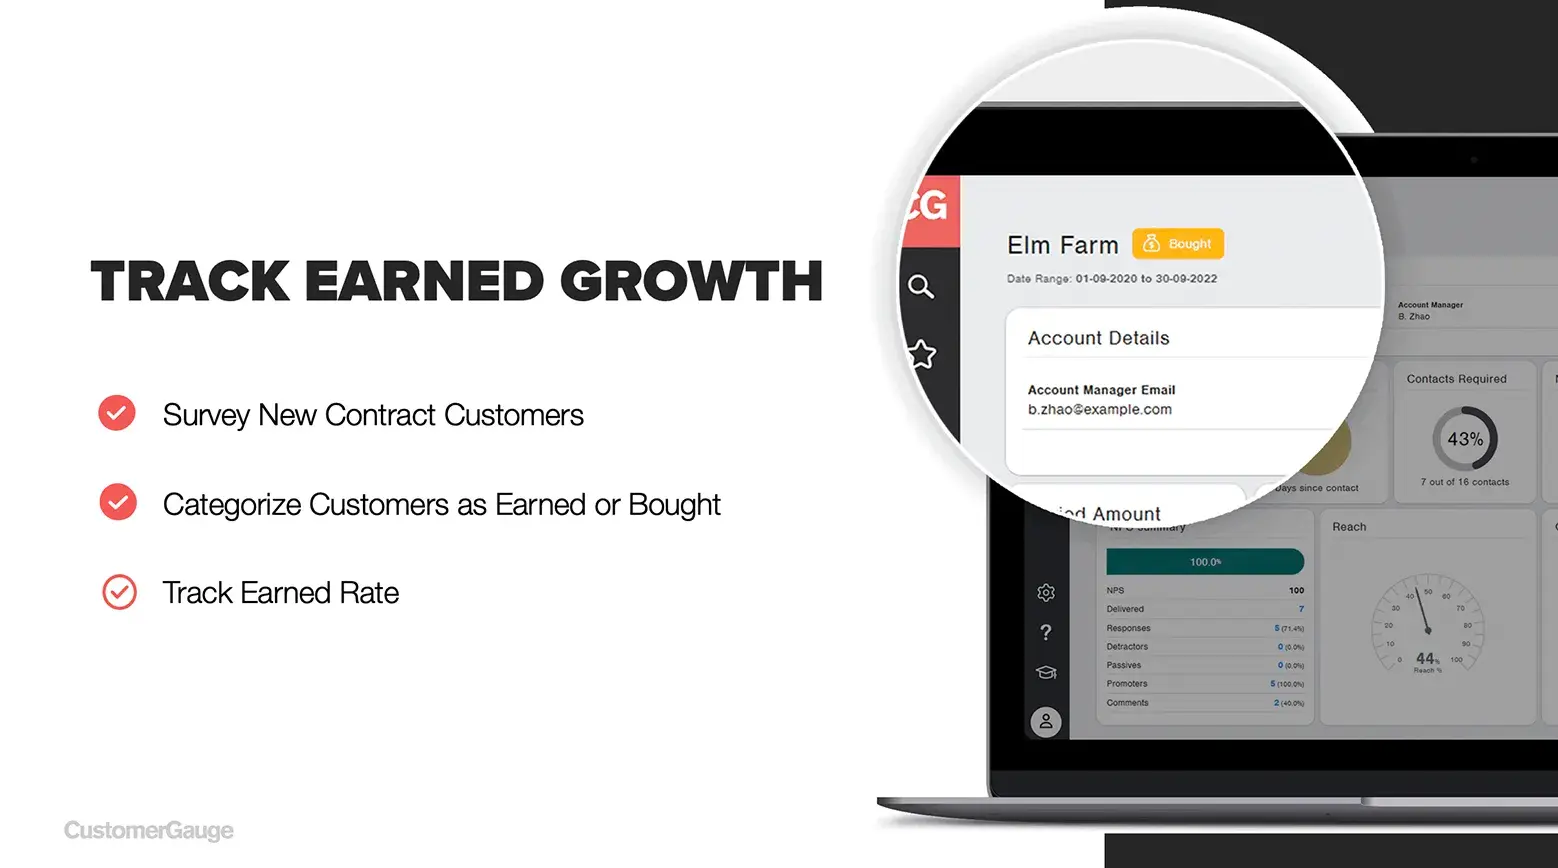 Track Earned Growth With Categorization